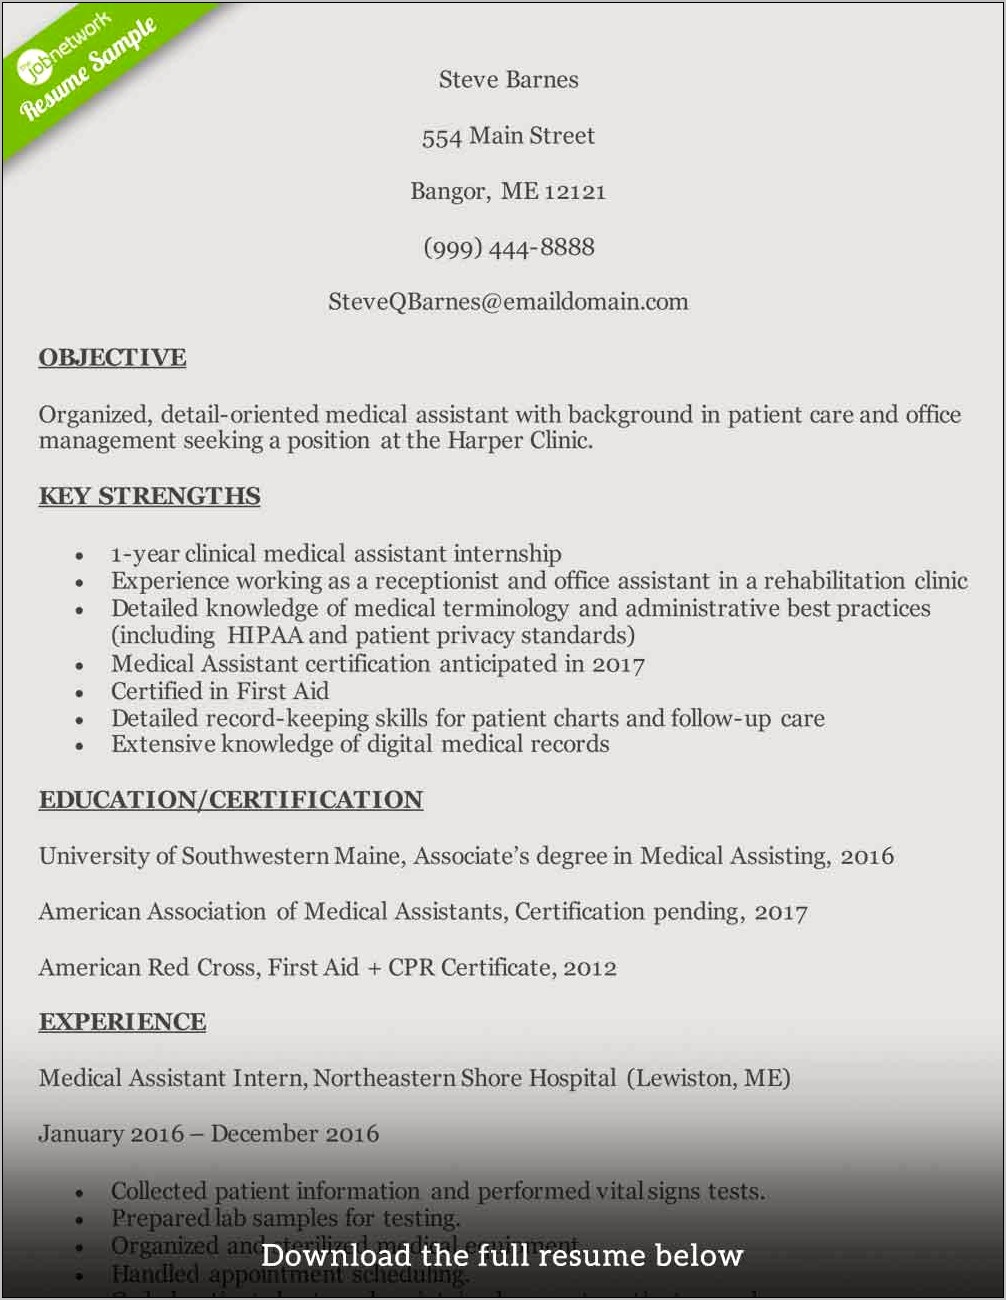 Administrative Assistant Resume Examples With No Experience